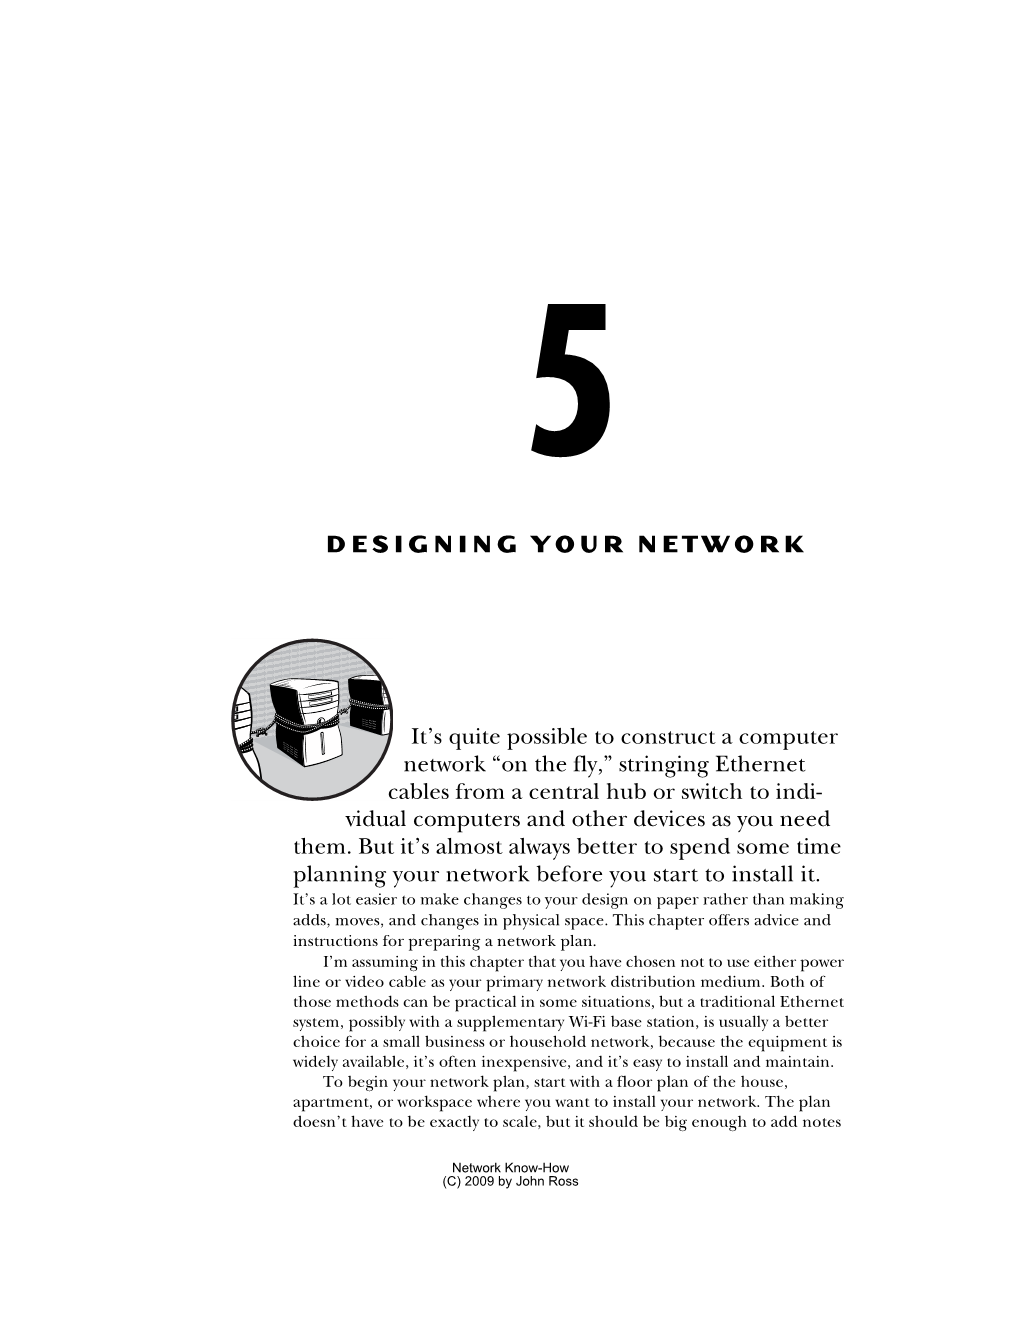 Designing Your Network